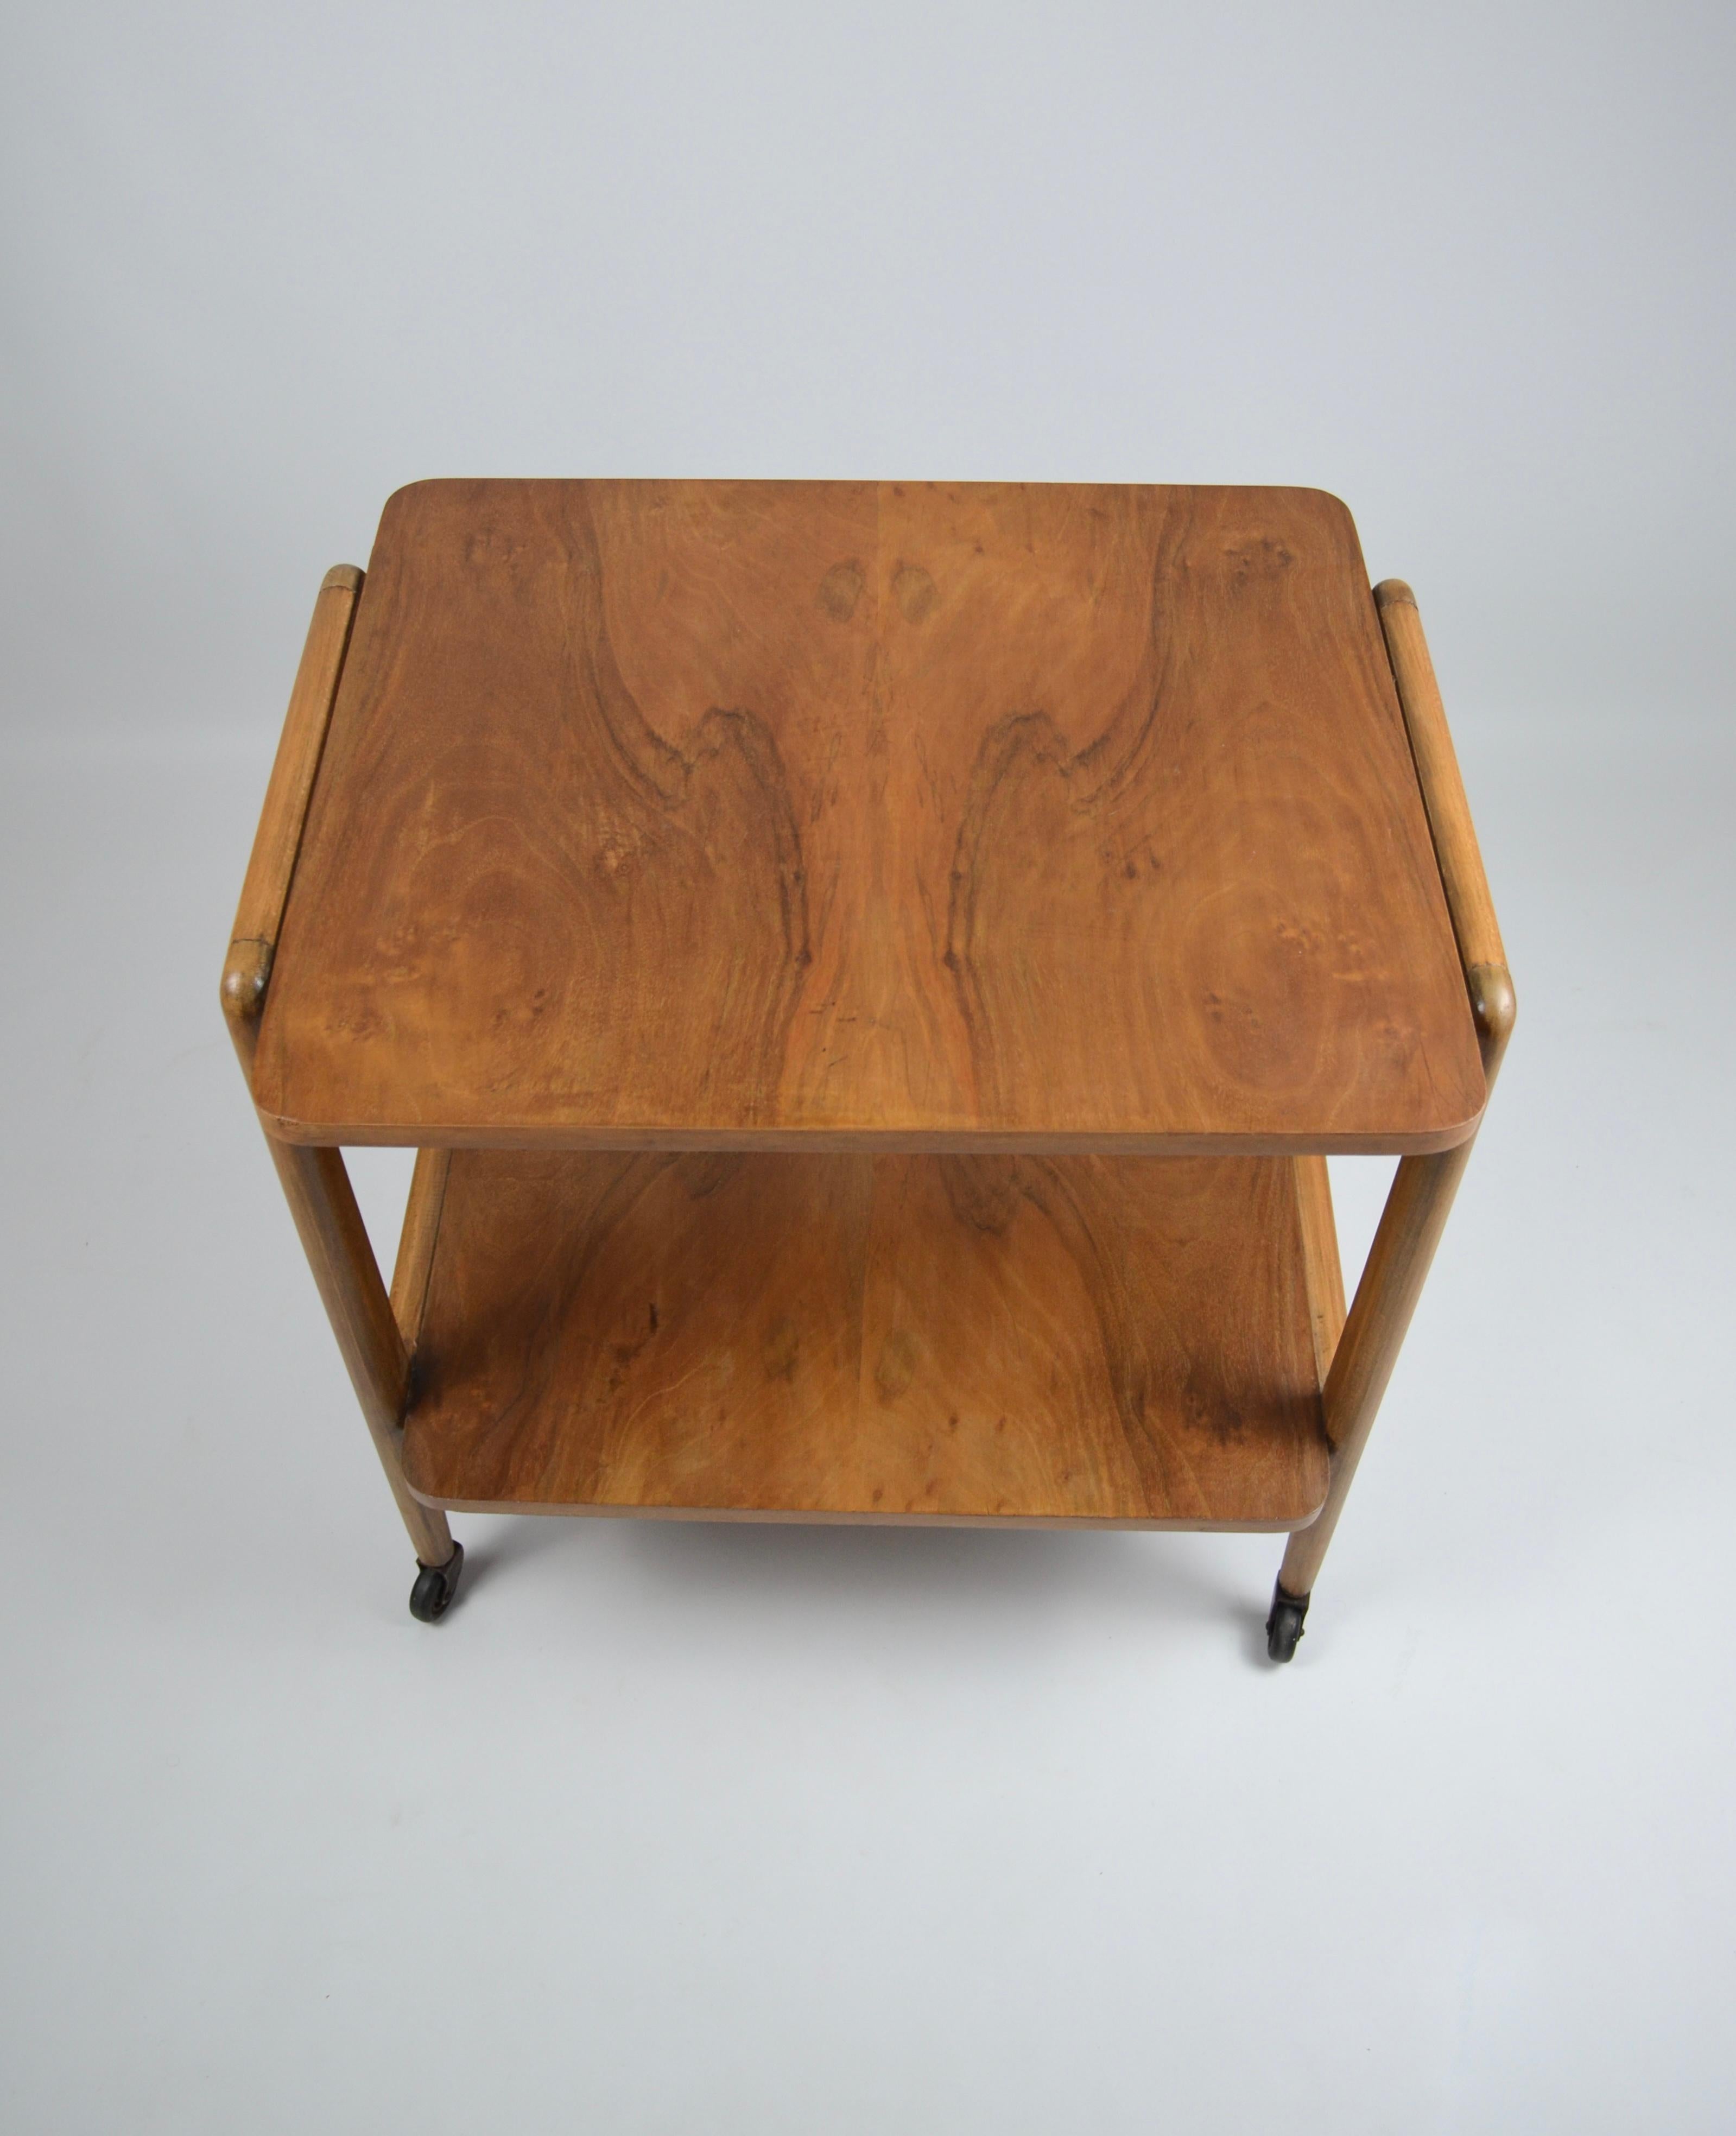 Elegant Modernist wooden trolley, 1950s, France.
Very beautiful design of the walnut veneer of the tops.
Trolley mounted on wheels.
Decorative as well as useful.